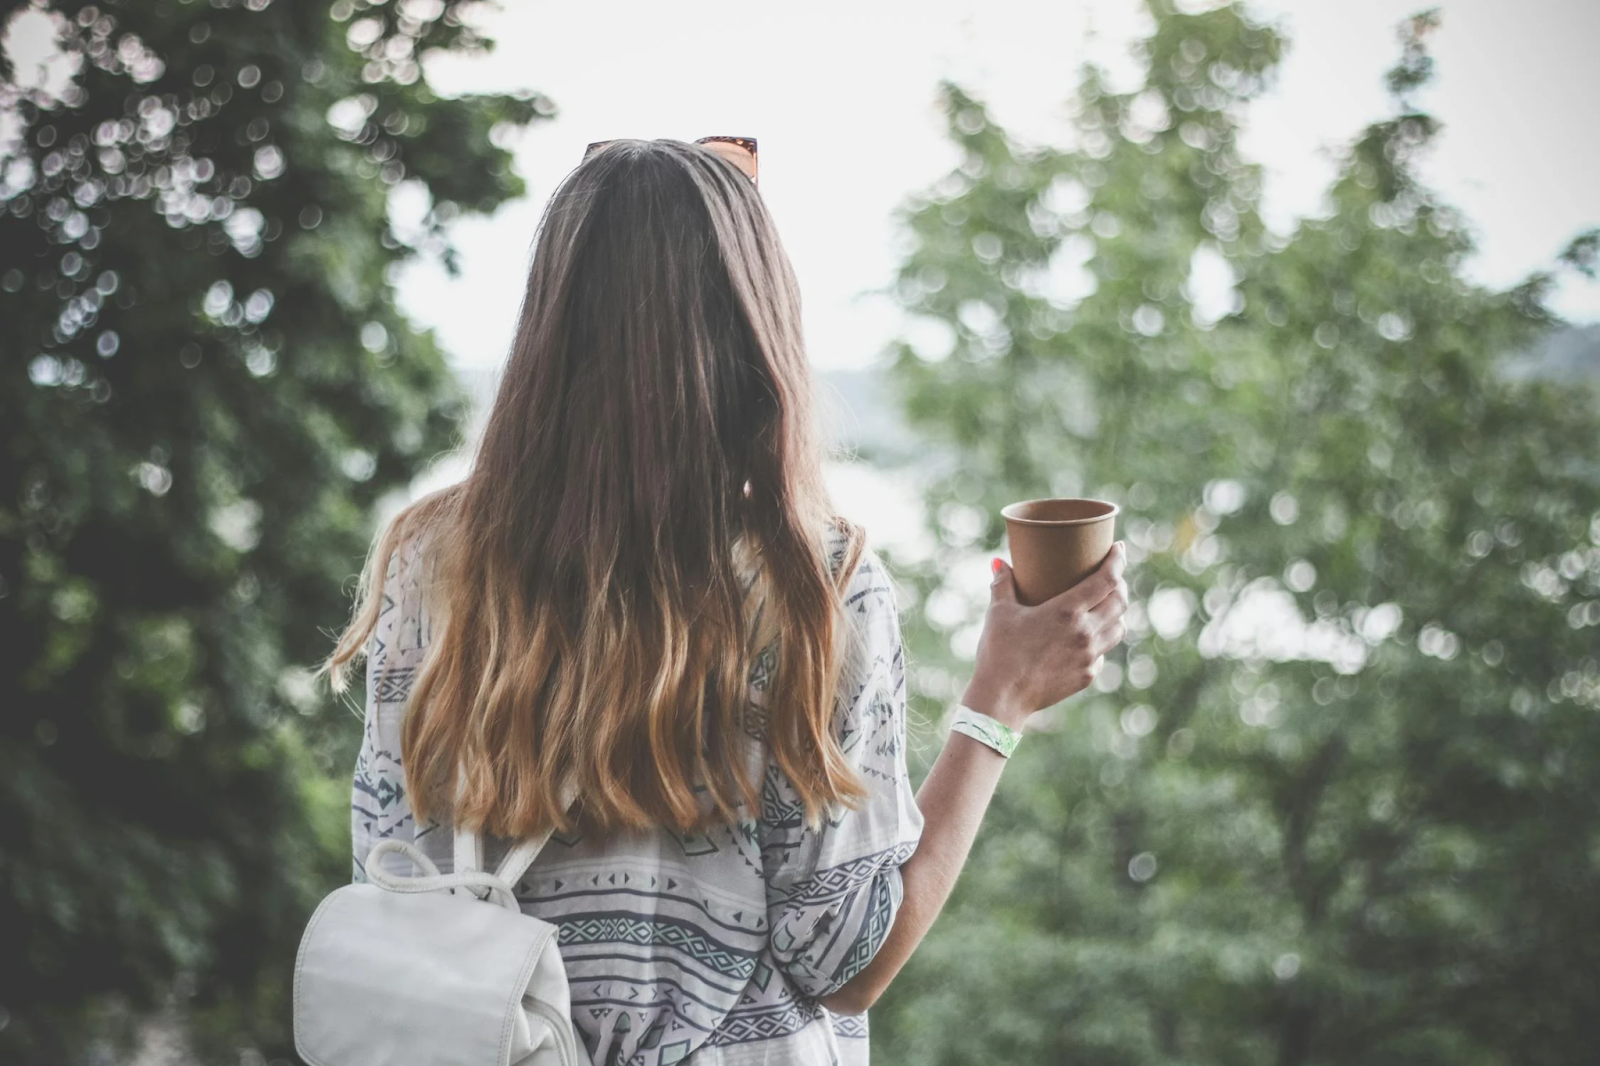 Woman with her back to the screen showing her long hair while holding a cup of coffee. Taken from Pexels